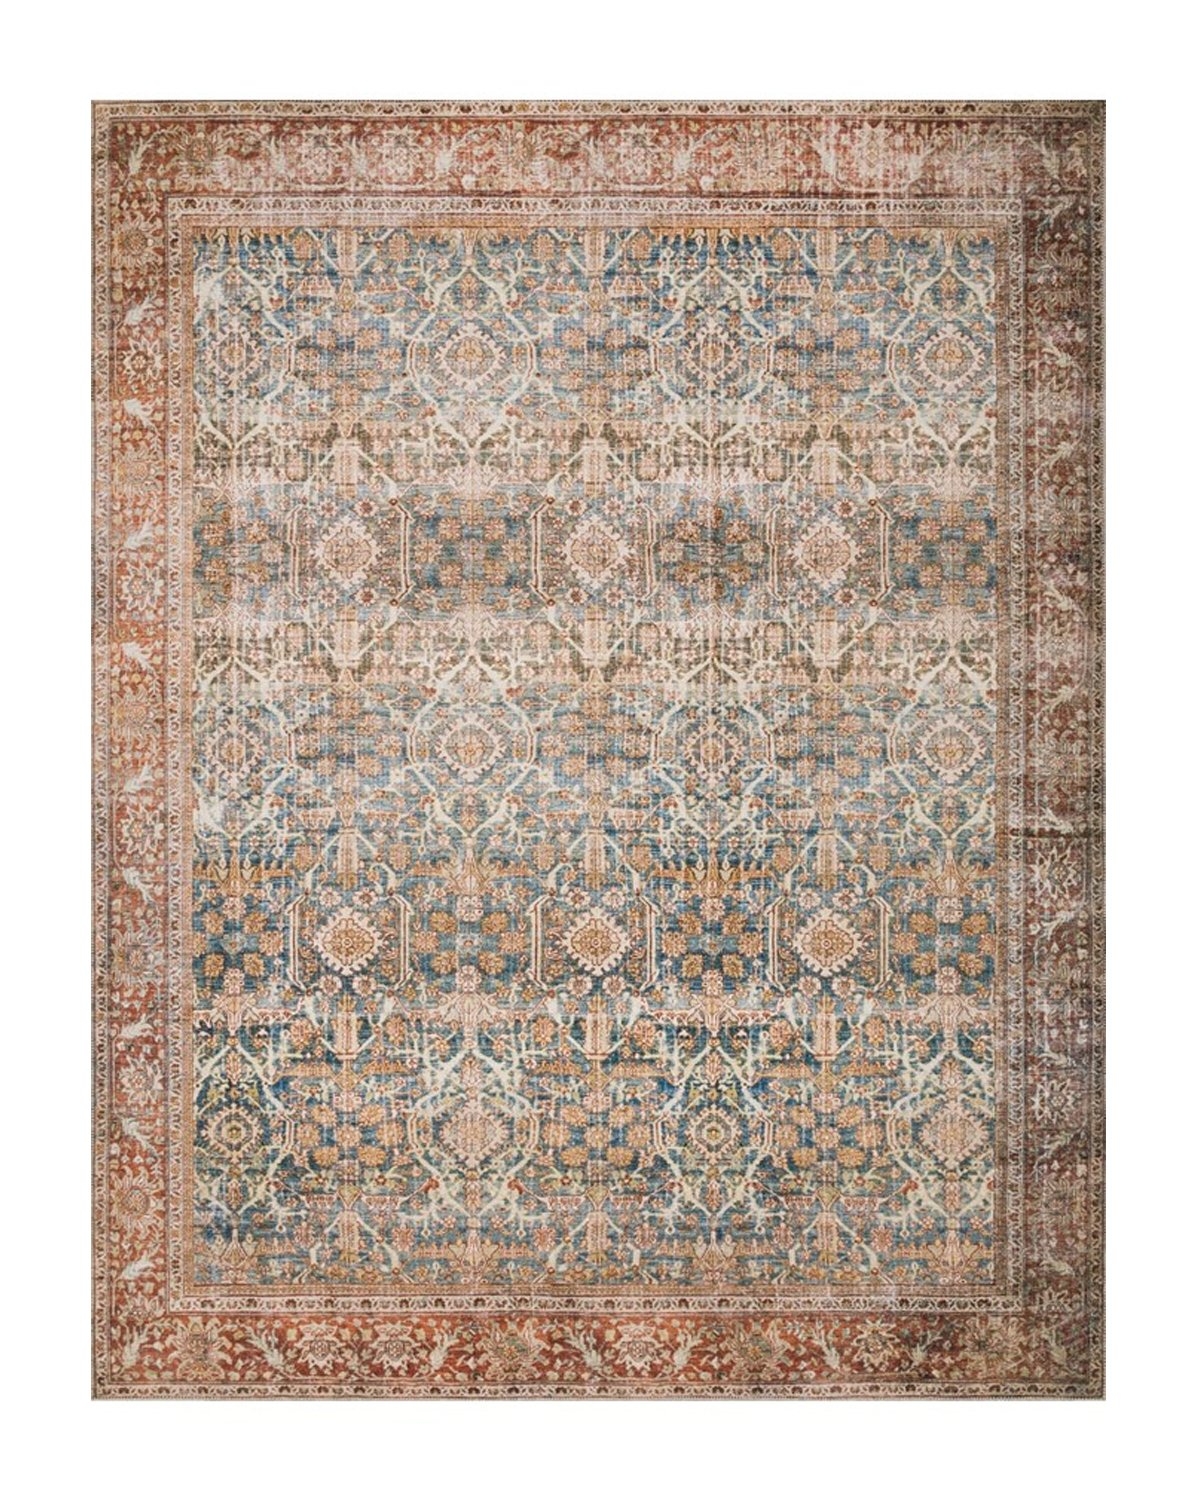 TUNIS PATTERNED RUG, 7'6" x 9'6" - Image 0